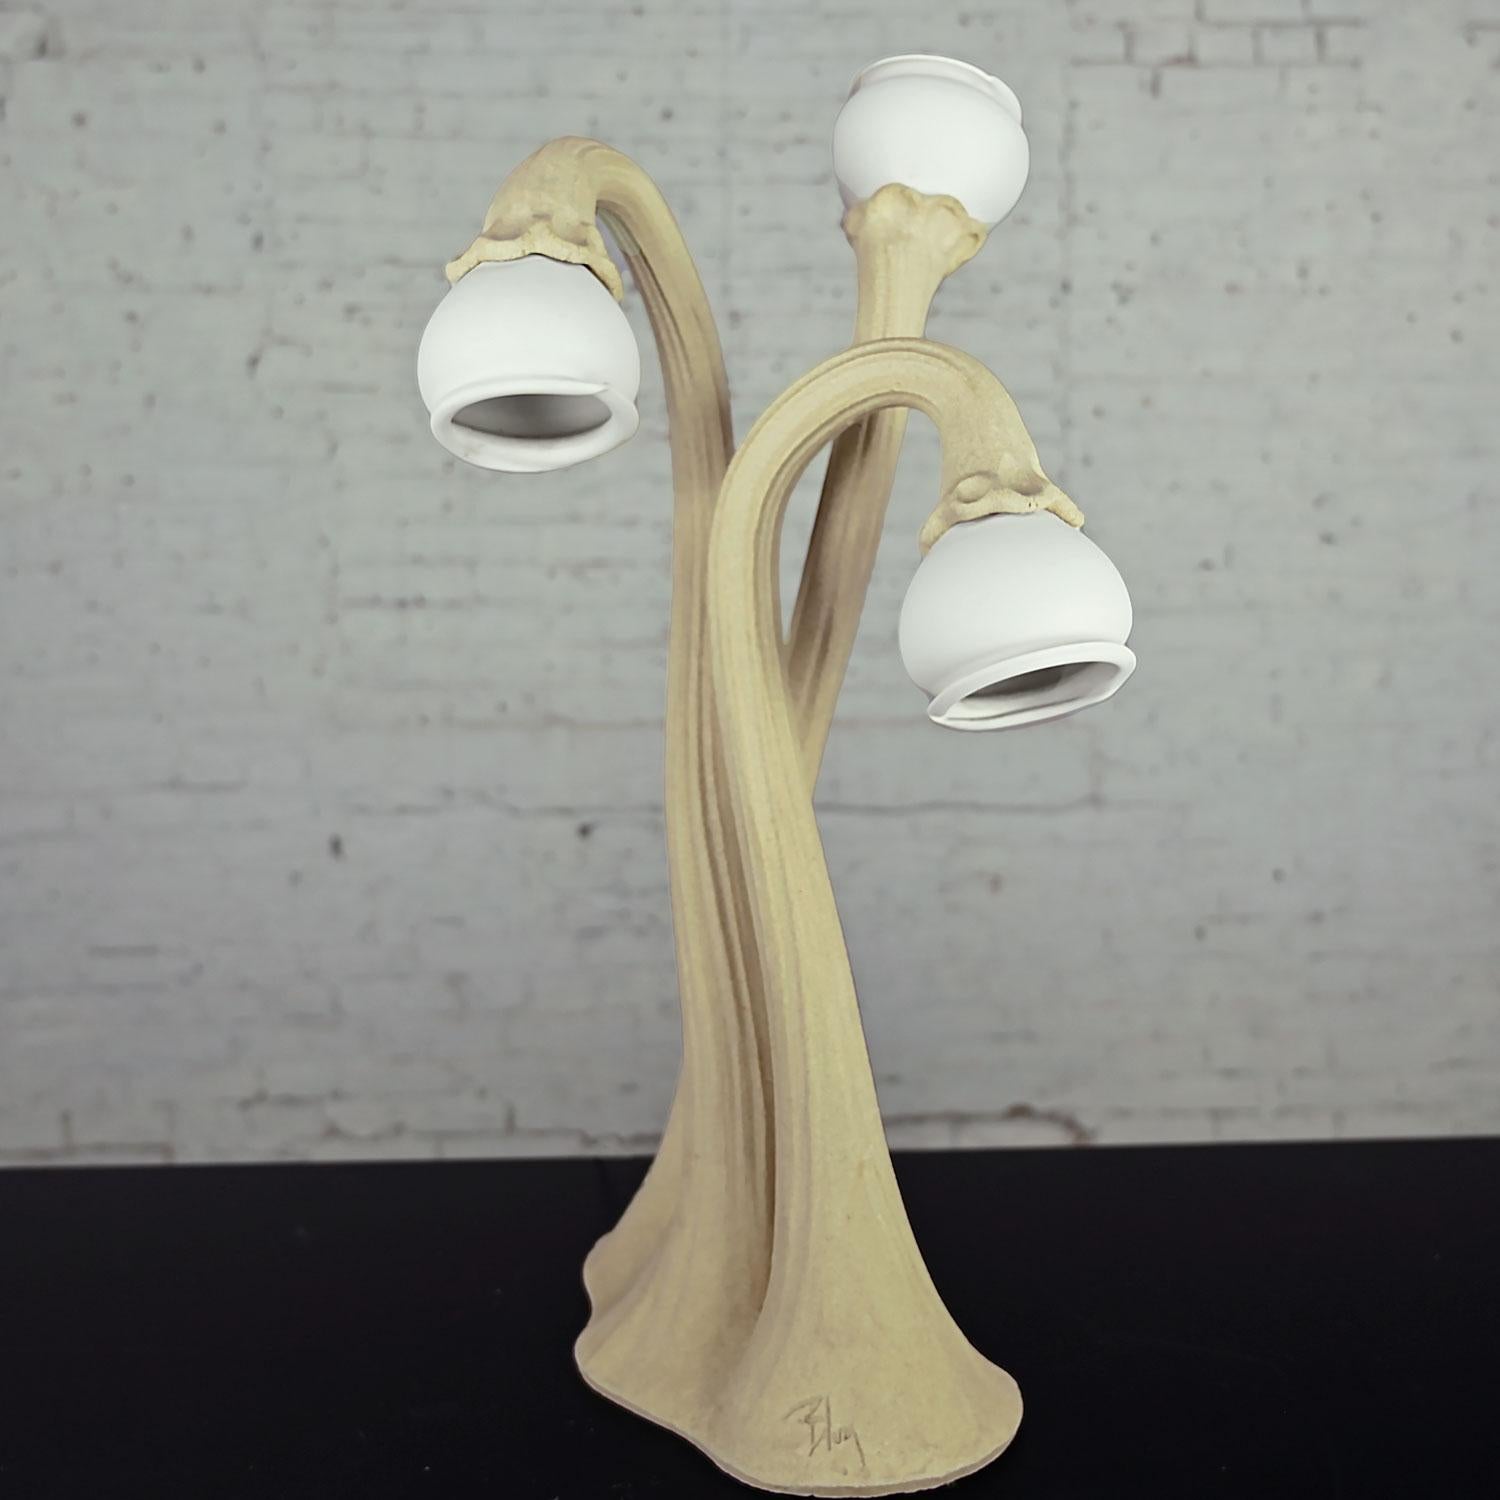 Fabulous postmodern or Art Nouveau style sculptural calla lily stoneware table lamp by Doug Blum. Beautiful condition, keeping in mind that this is vintage and not new so will have signs of use and wear. Please see photos and zoom in for details. We